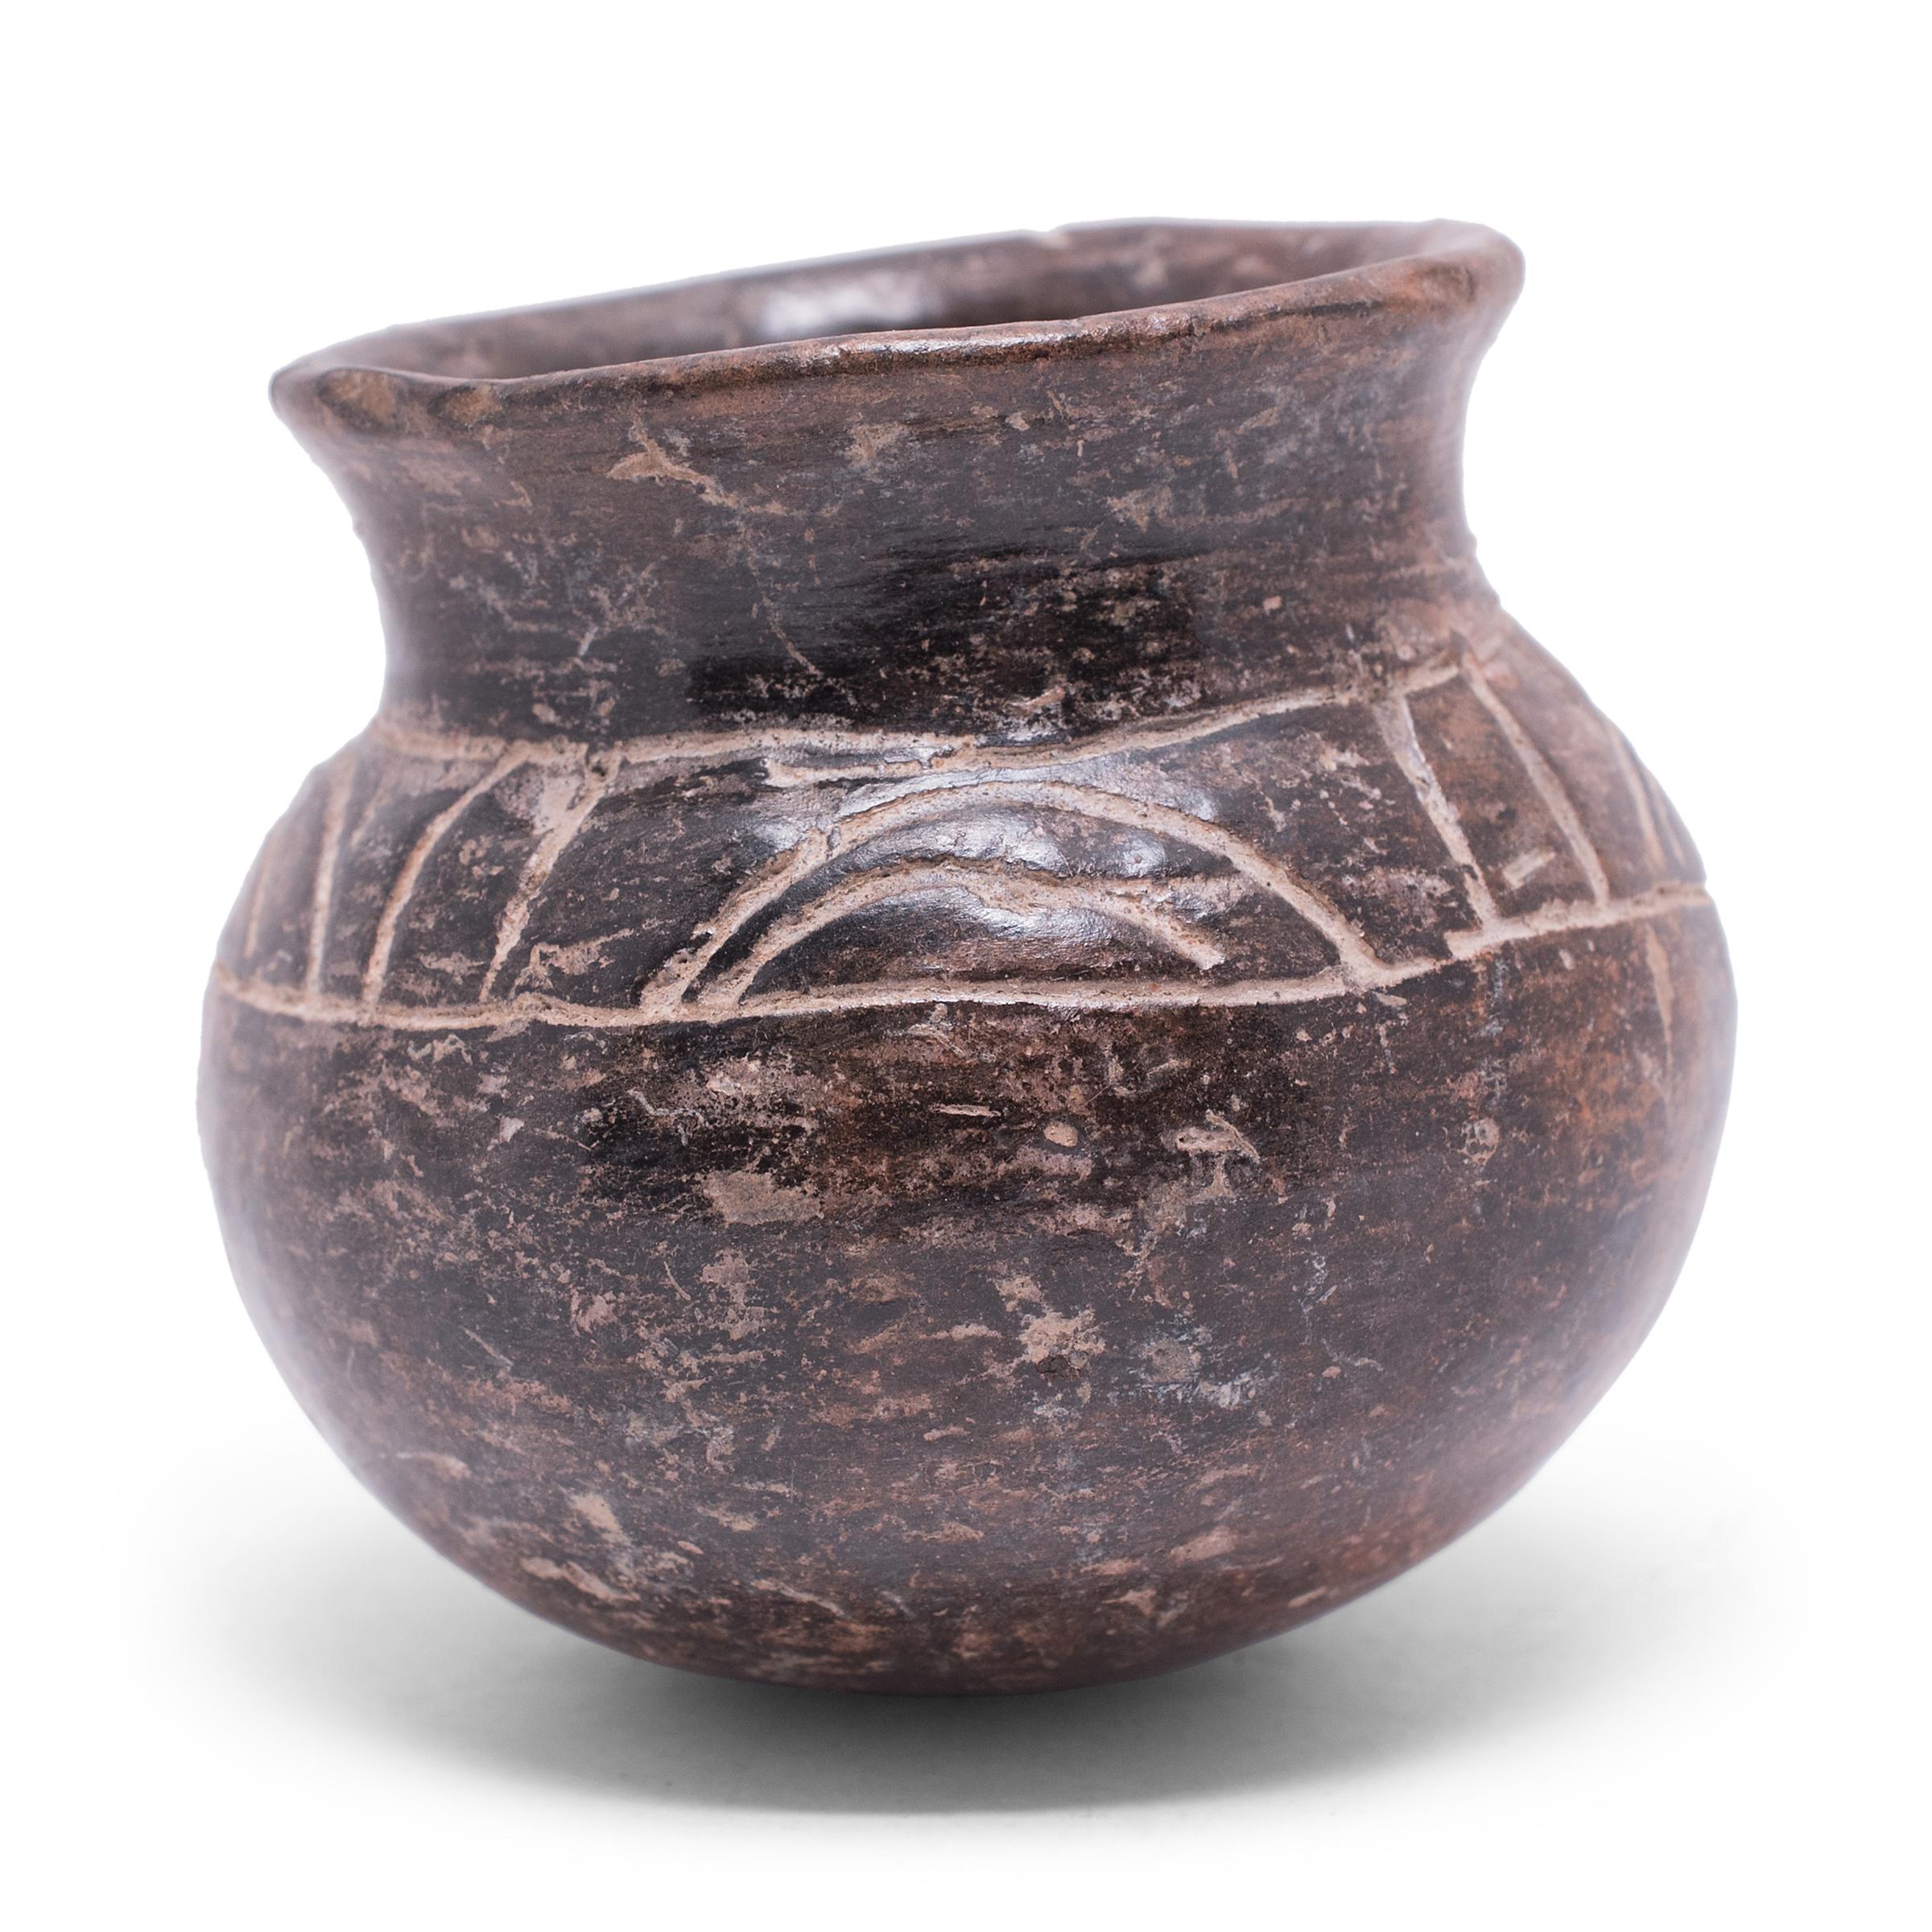 Exhibiting a rich patina, this petite blackware vessel shows many telltale signs of Pre-Columbian pottery. Speckled with imperfections, the vessel's darkened surface was achieved by applying a mineral-rich slip for a monochrome finish that